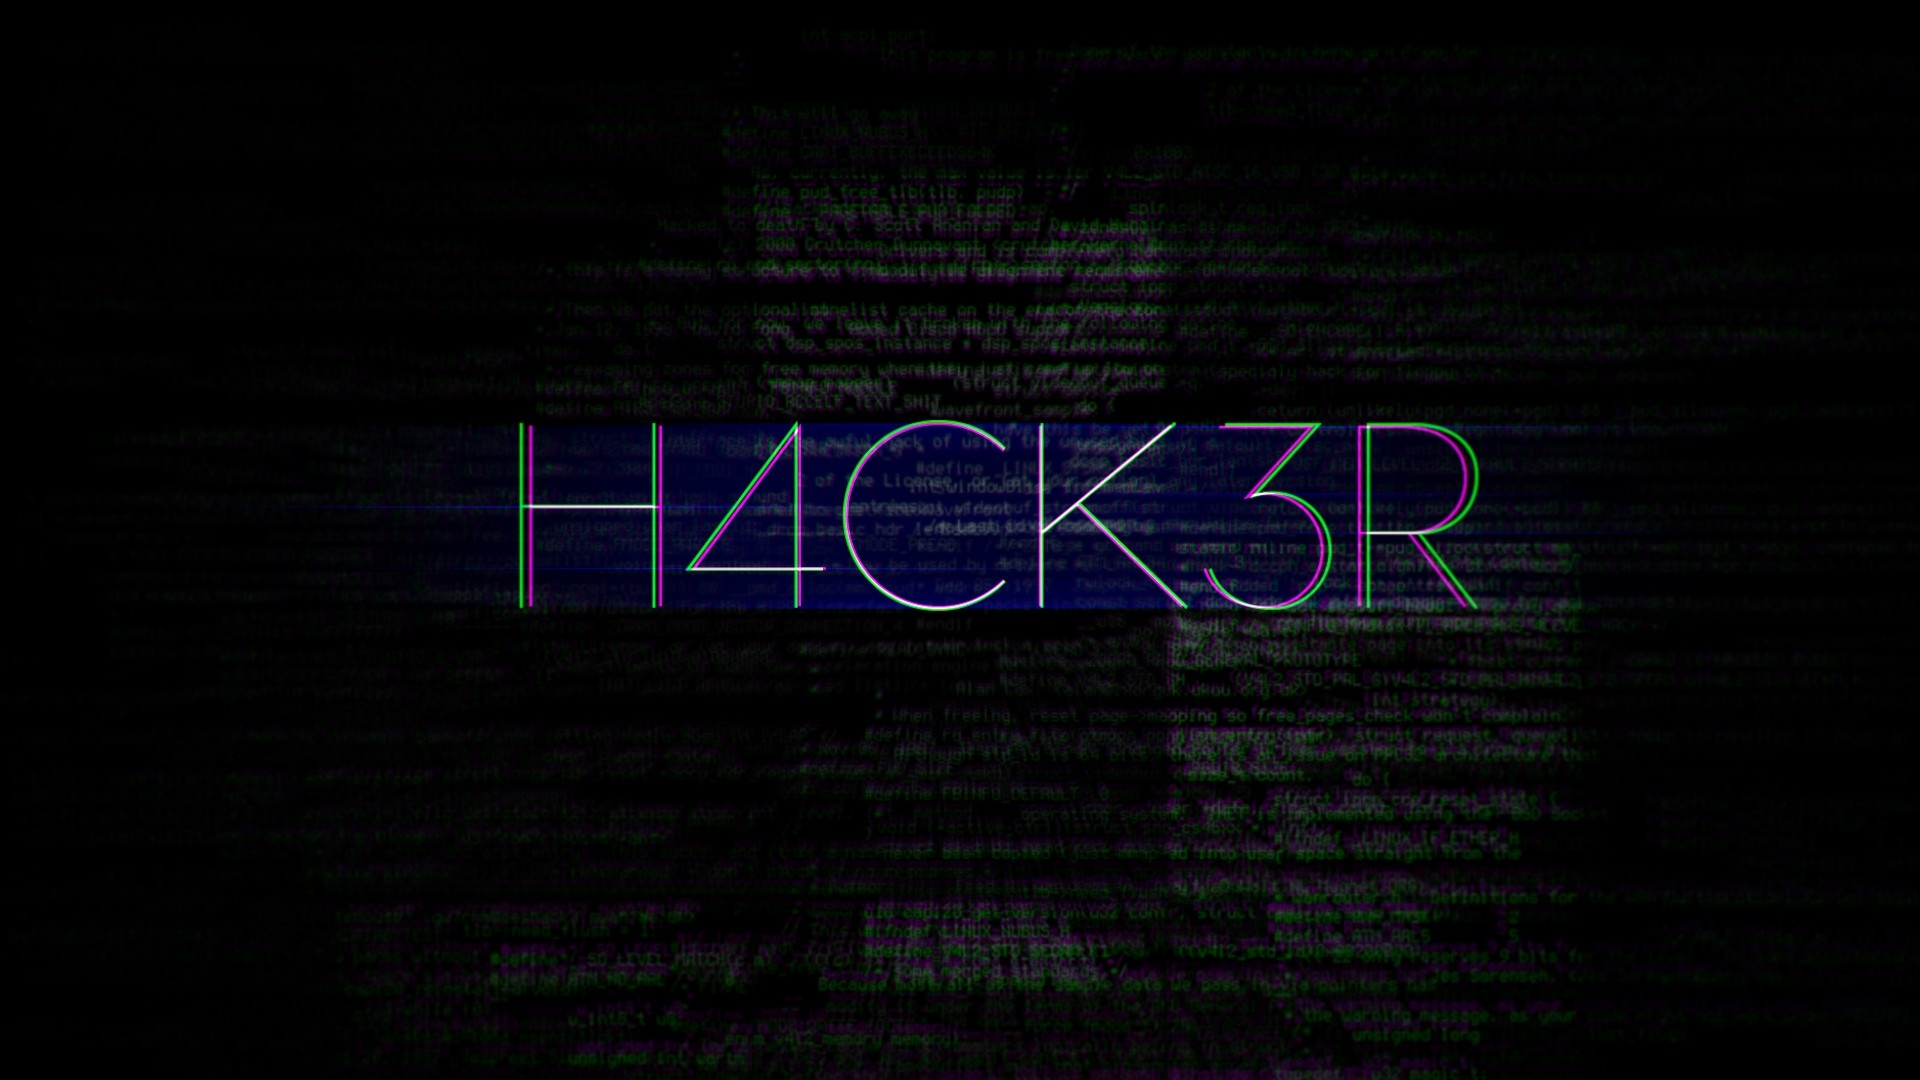 hacking games for pc free download